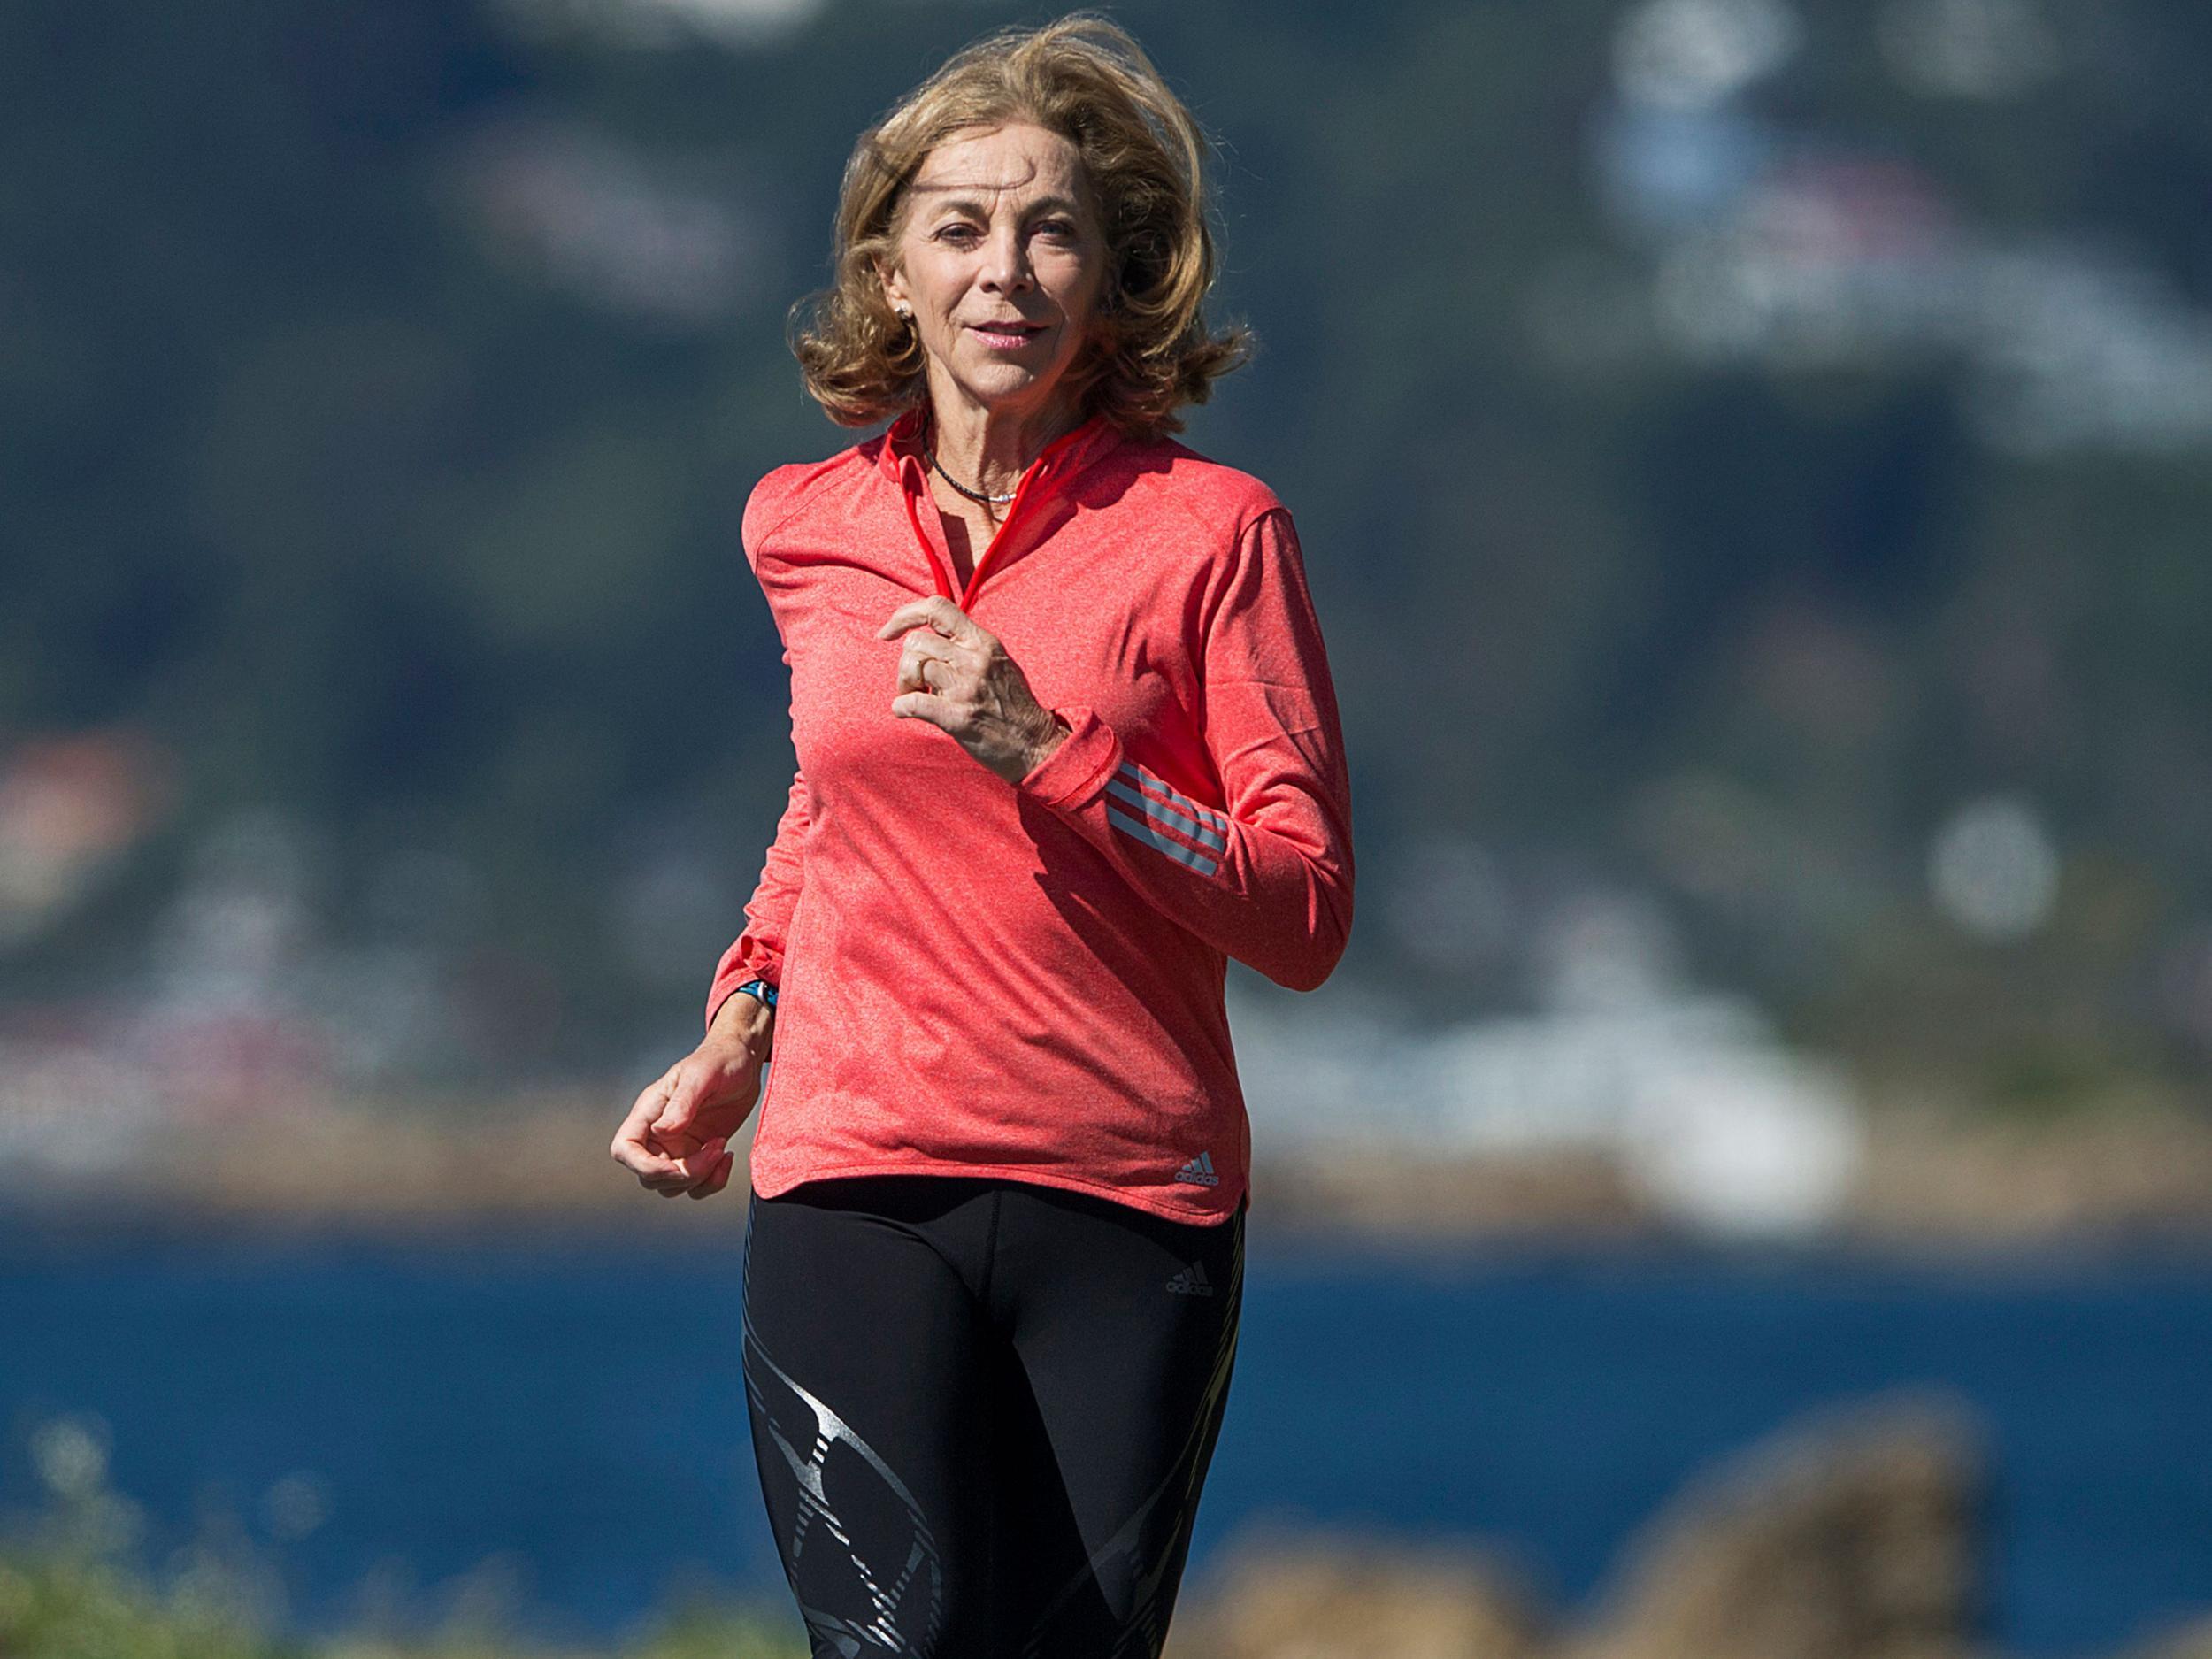 Runner Universe - In 1967, Kathrine Switzer made history by becoming the  first woman to run the Boston Marathon with an official race number. She  did so despite the efforts the race